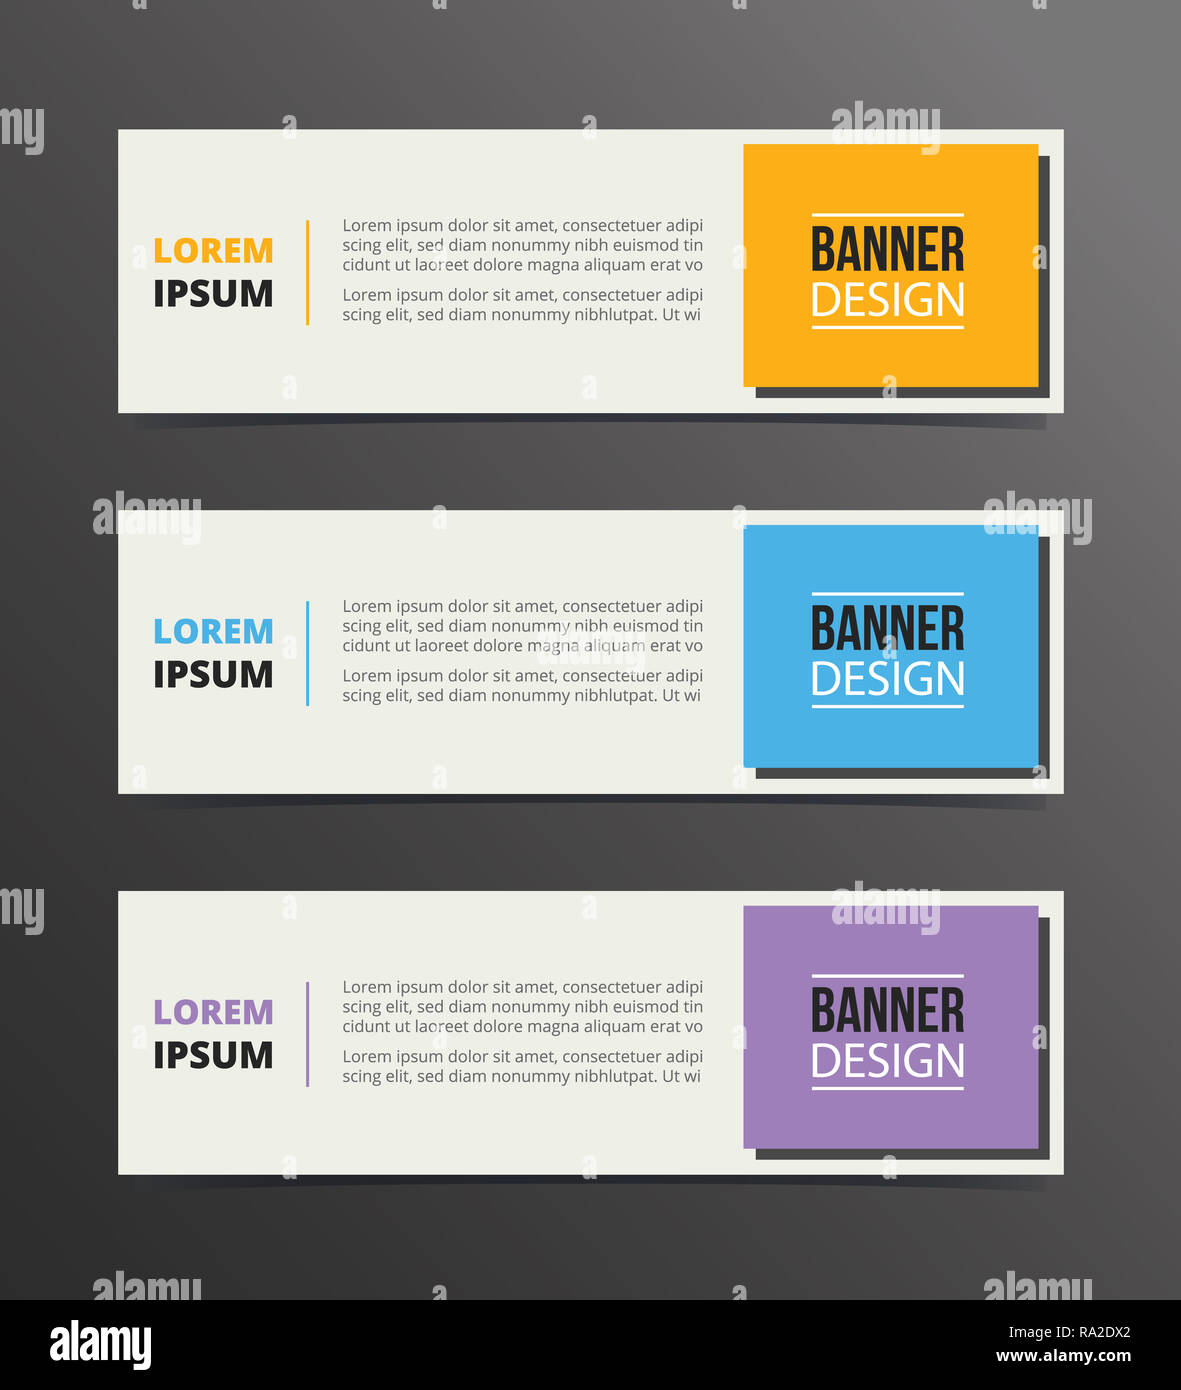 boxed or box style banner template design with horizontal advertising  banner space for text vector illustration Stock Photo - Alamy